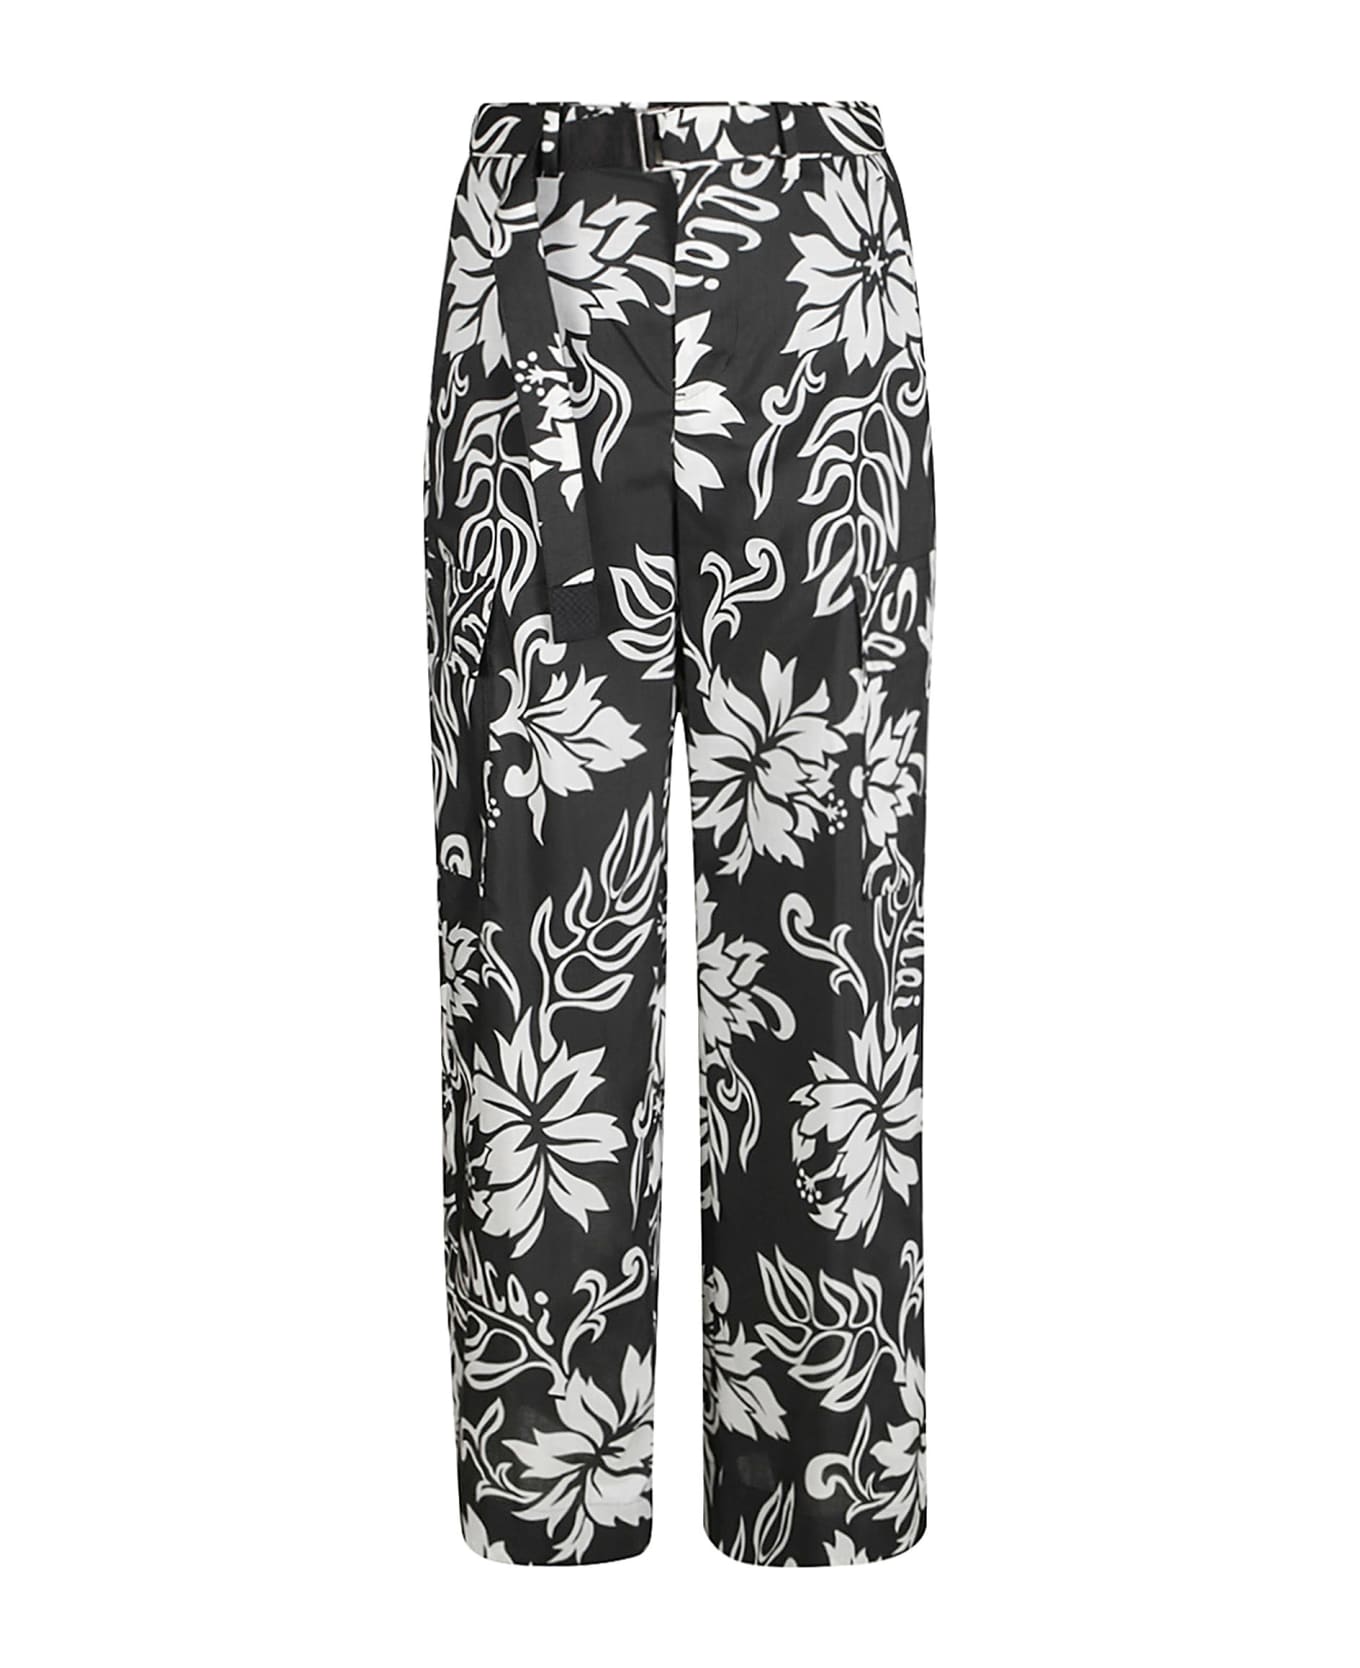 Sacai Printed Belted Trousers - Black ボトムス